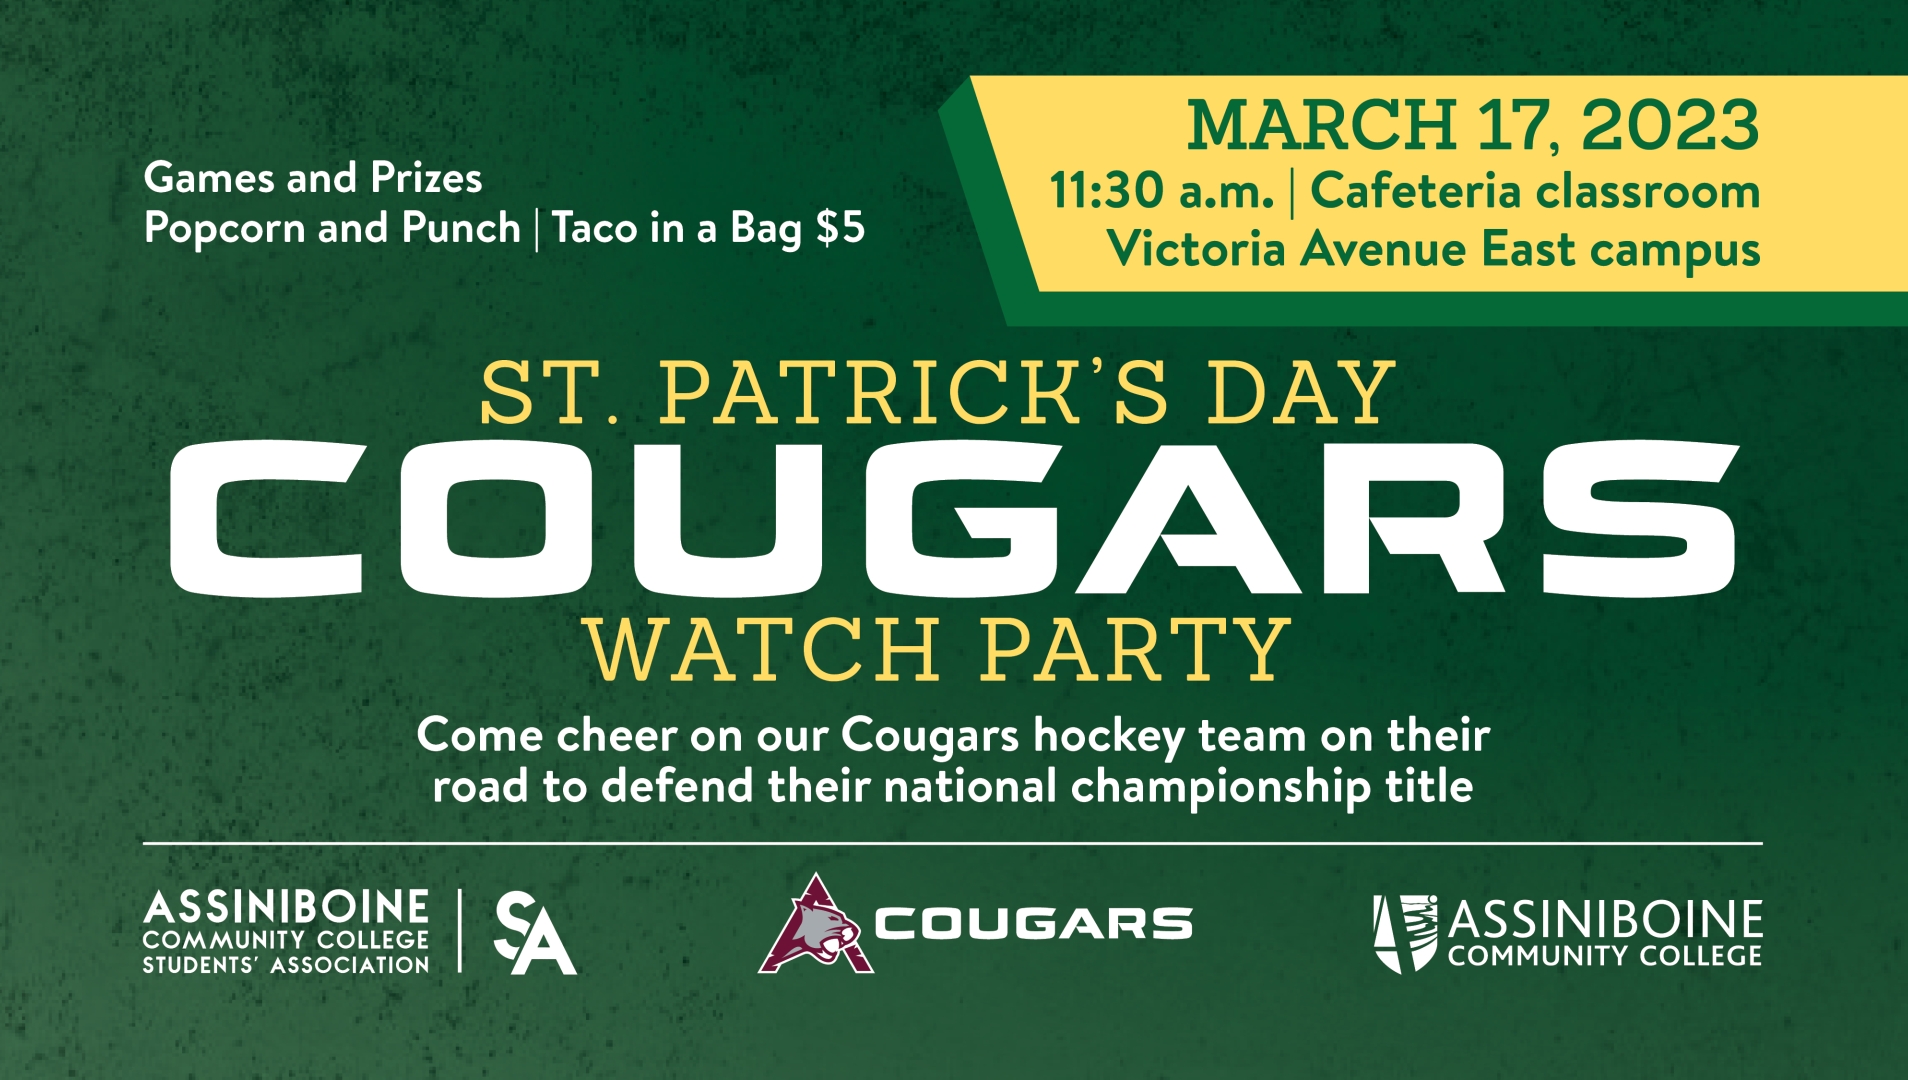 Cougars Watch Party